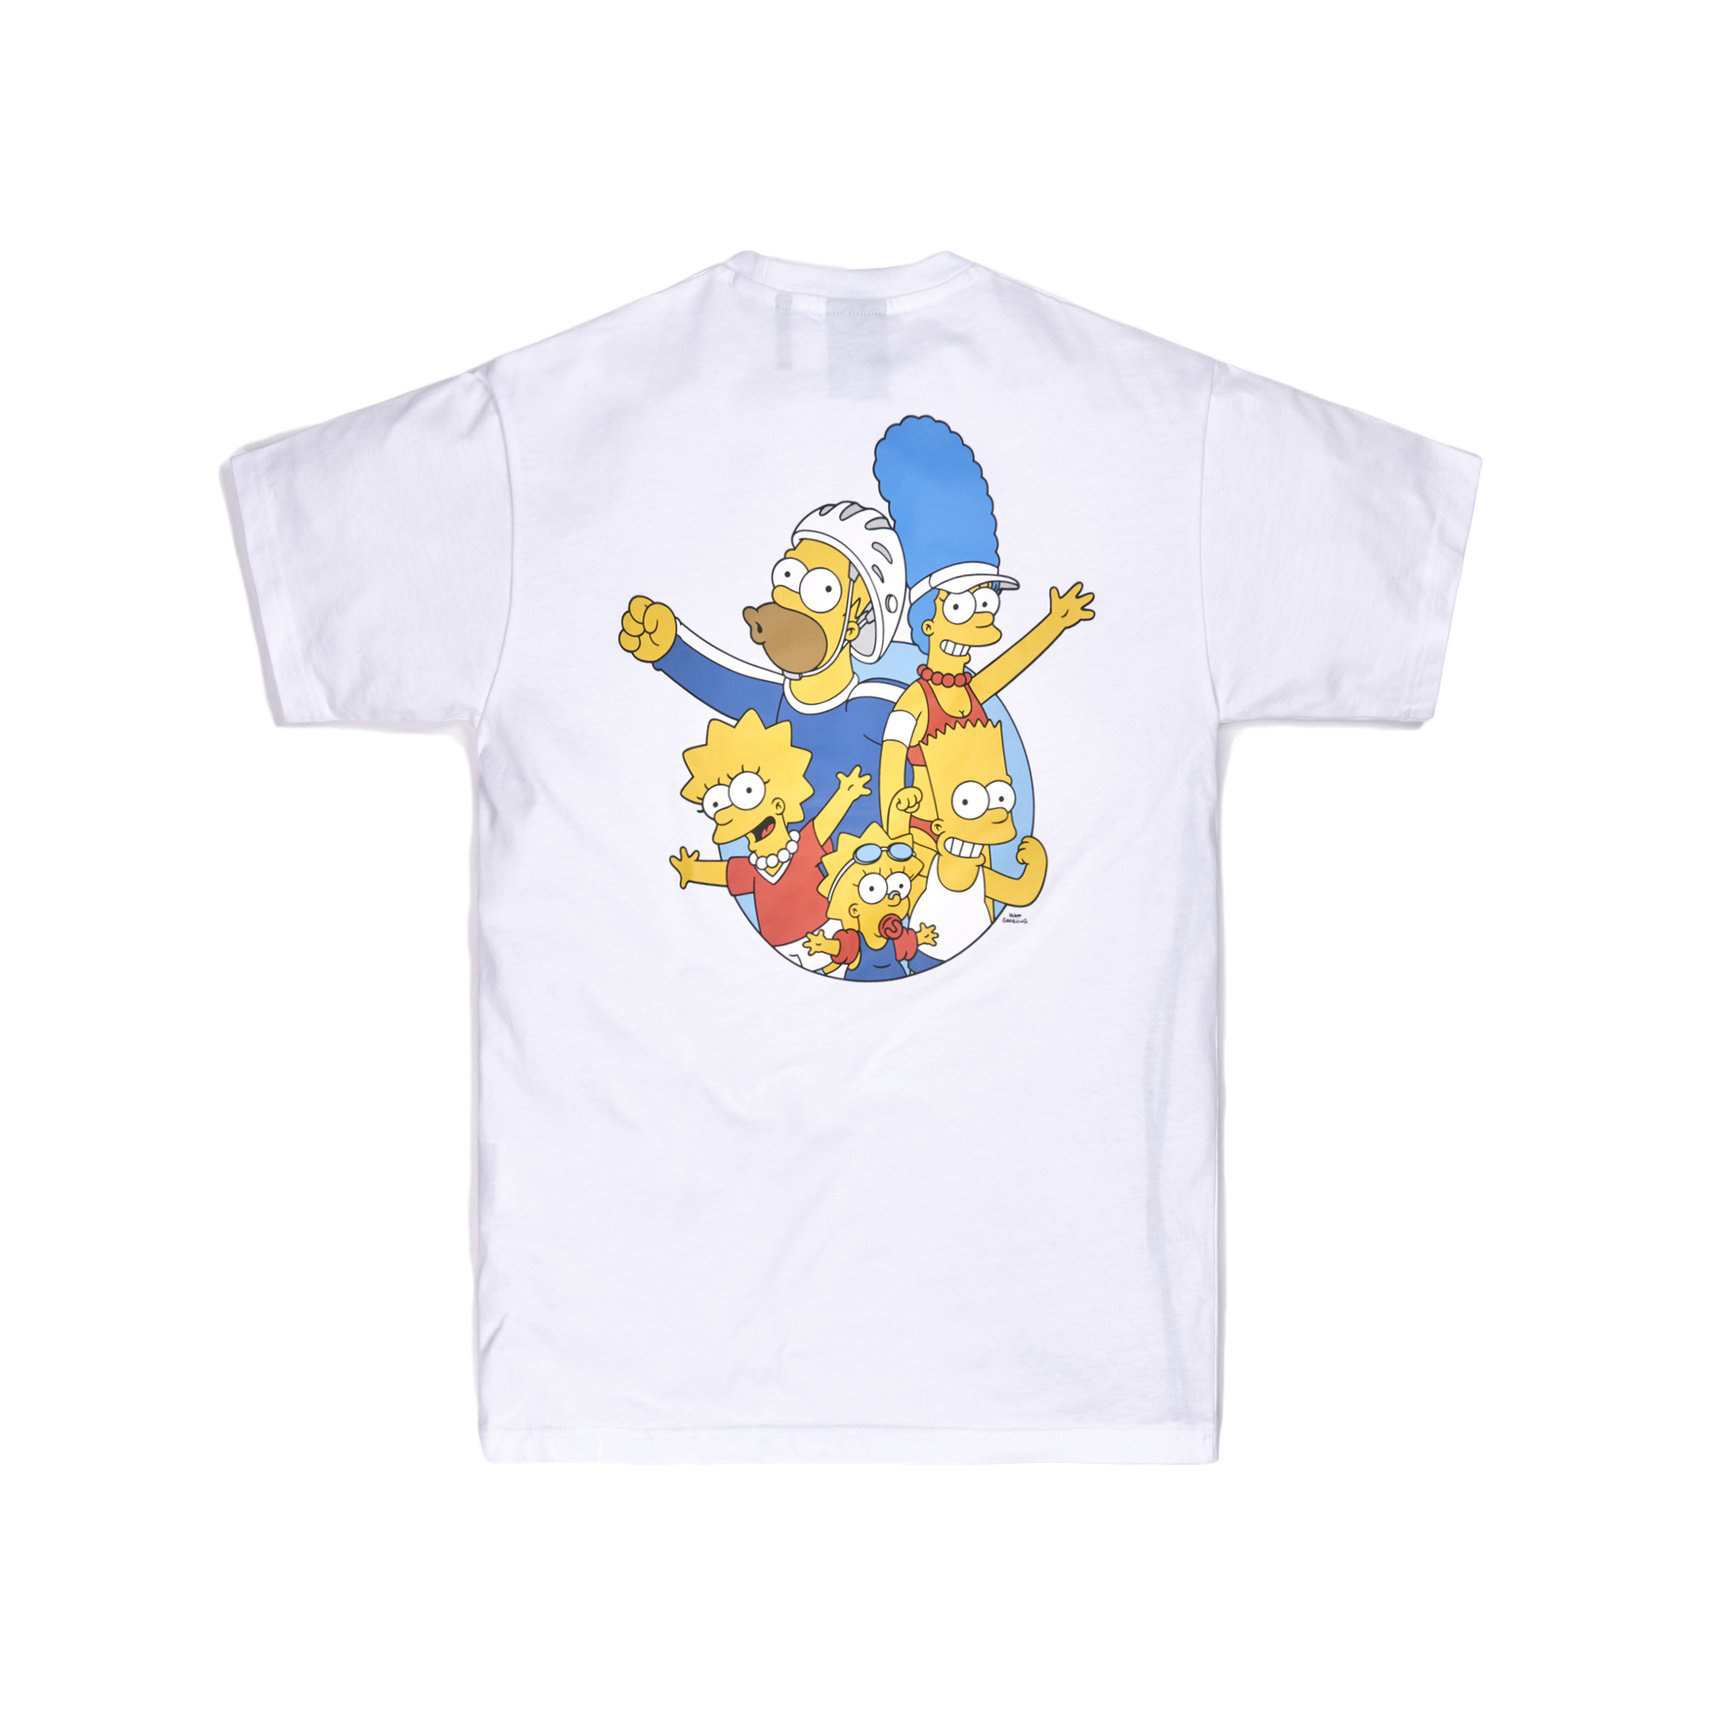 Kith x The Simpsons Sports Family Tee White メンズ - SS21 - JP